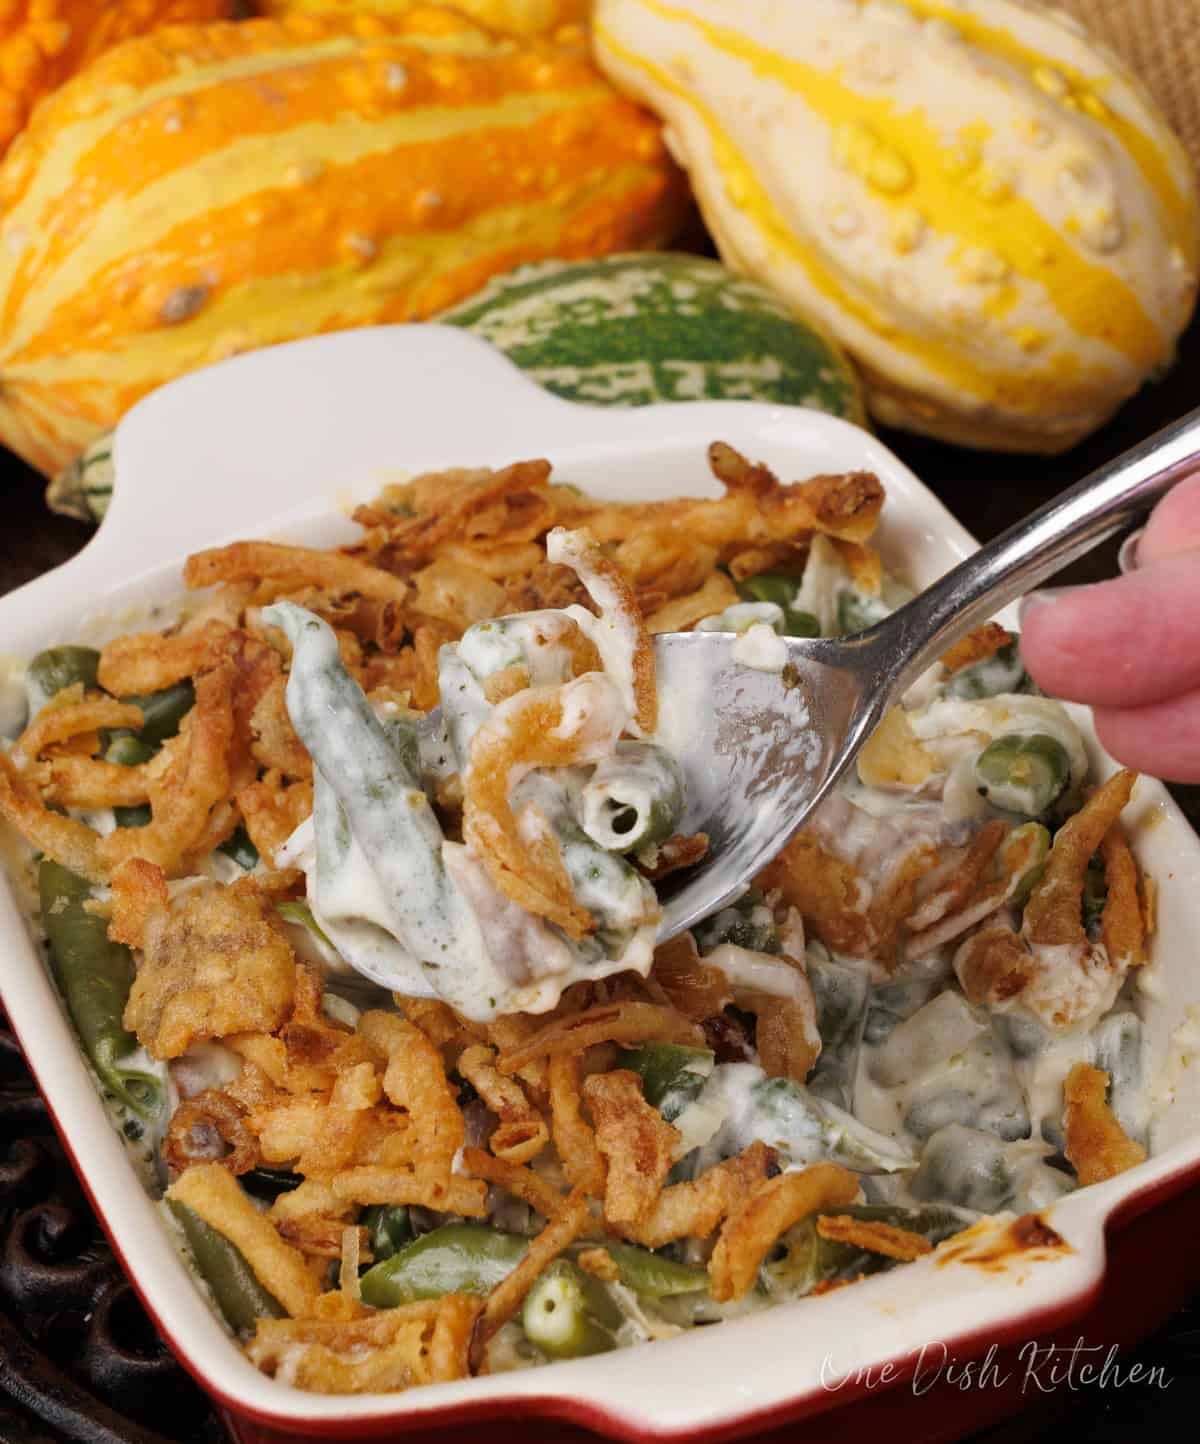 a spoonful of green bean casserole hovering above the small casserole dish